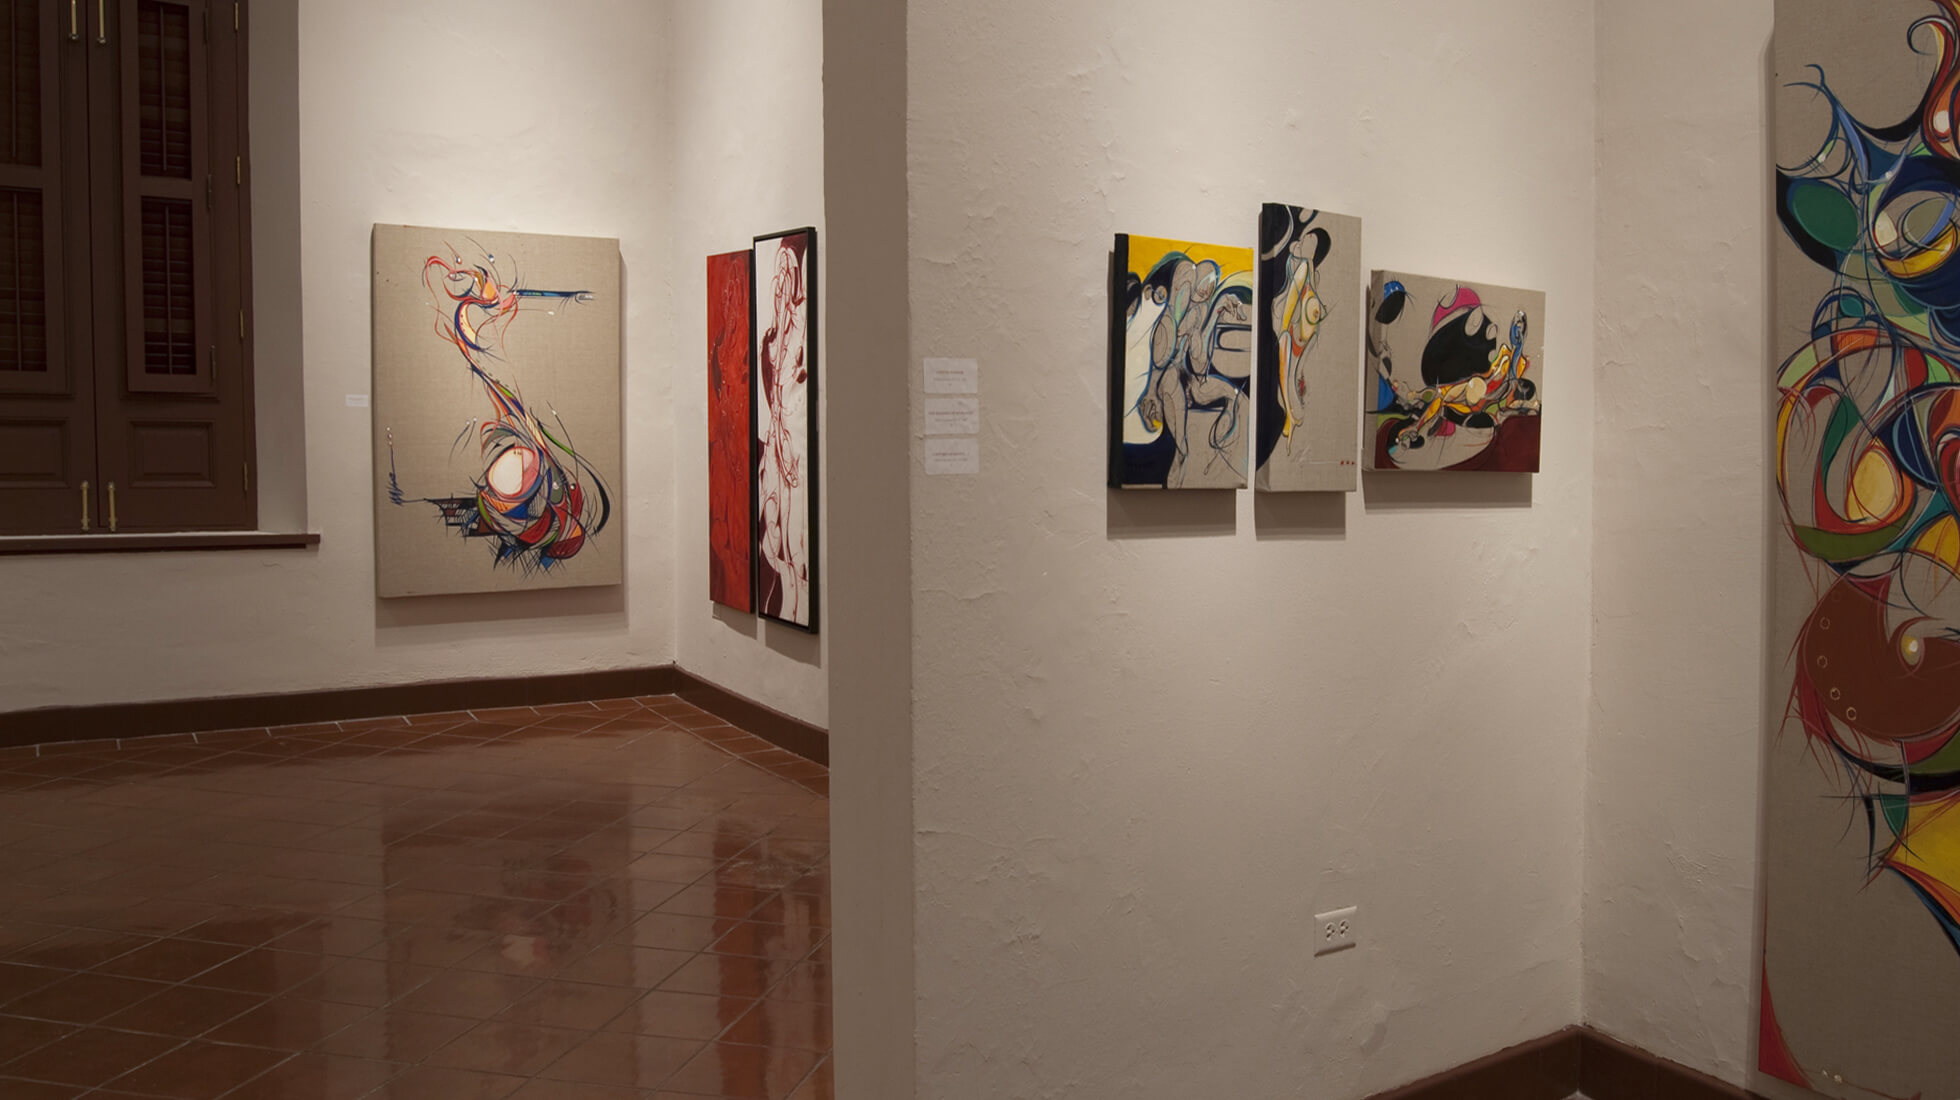 Photo of the Salon C of artist and painter Michael J. Korber at his Art Retrospective at the Museo de las Américas in Old San Juan, Puerto Rico, titled - A decade of line and color, in 2007.